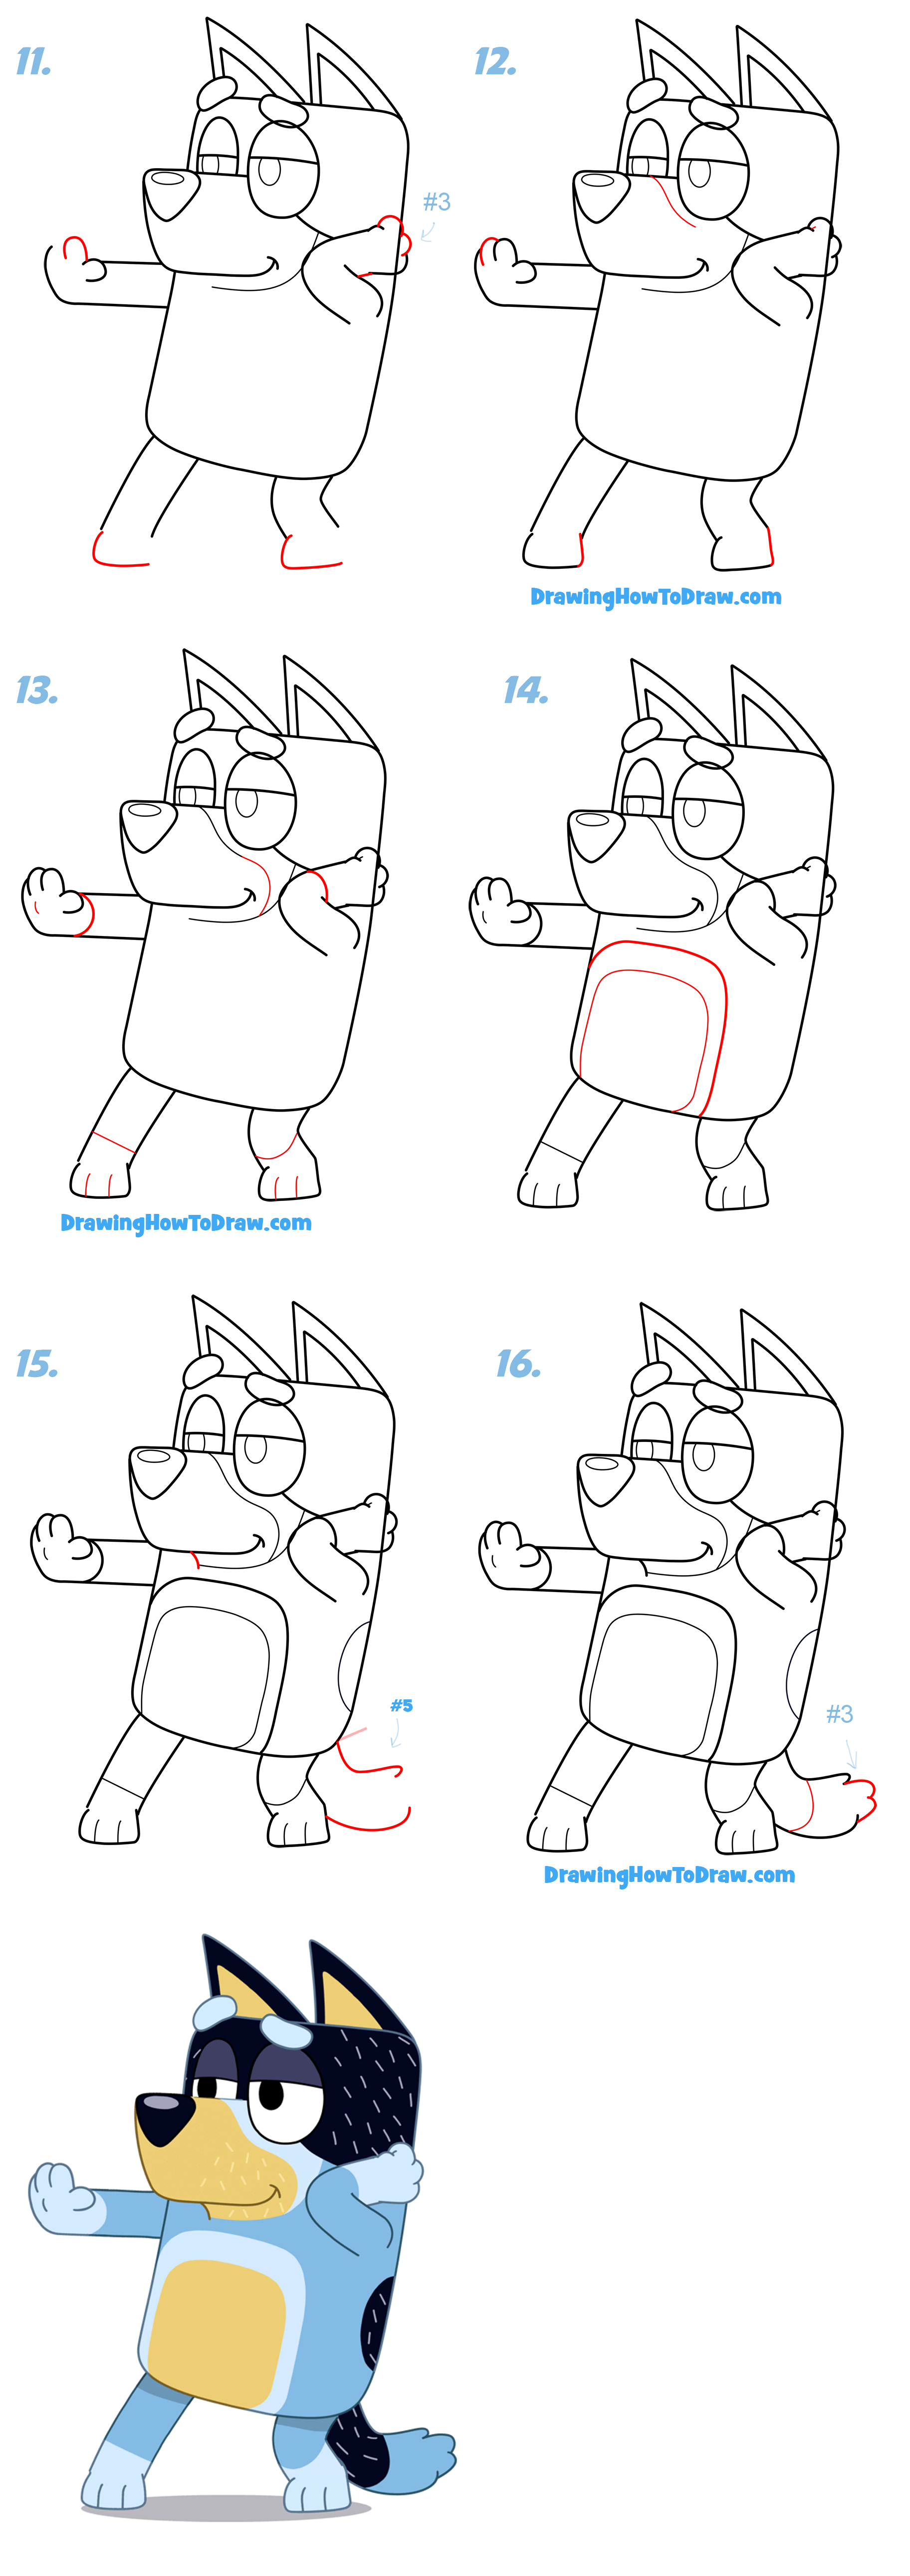 Learn How to Draw Bluey Muffin from Bluey Easy Step-by-Step Drawing Tutorial for Kids